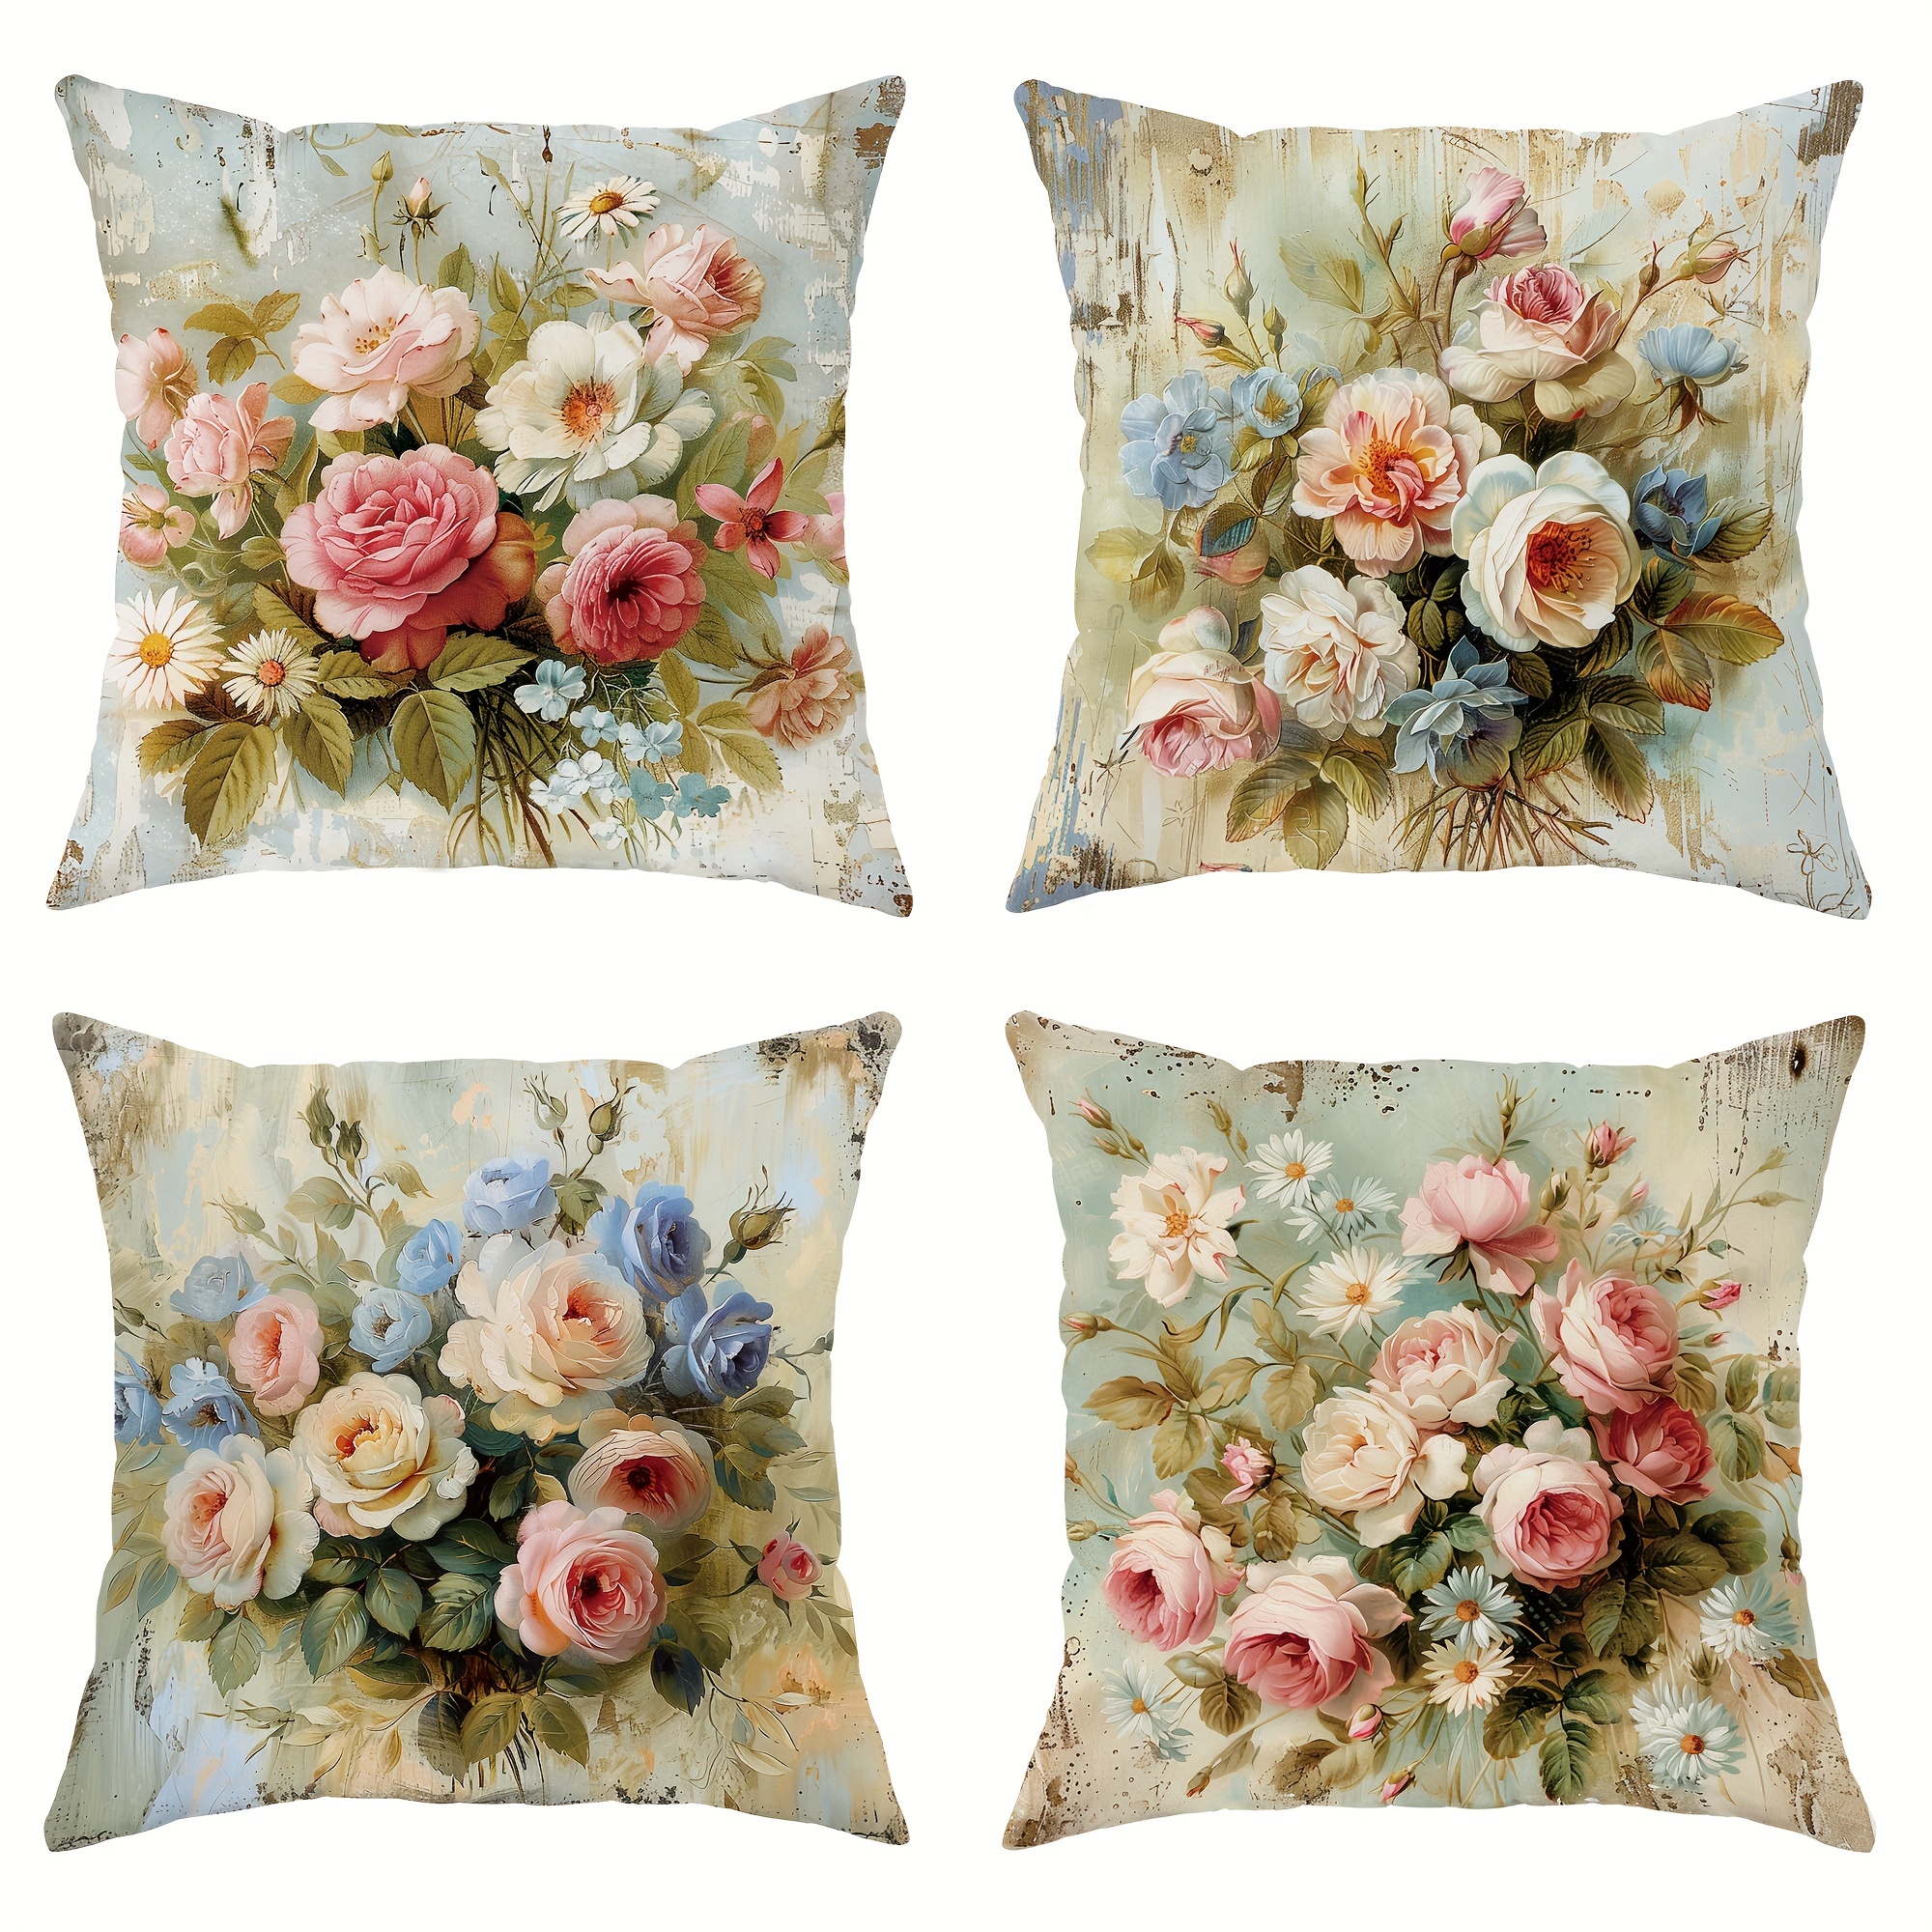 

4-piece Set Vintage Botanical Floral Throw Pillow Covers, 18x18 Inches - Soft Velvet, Pink & Green, Zip Closure For Living Room & Bedroom Decor Decorative Pillows Pillows Decorative